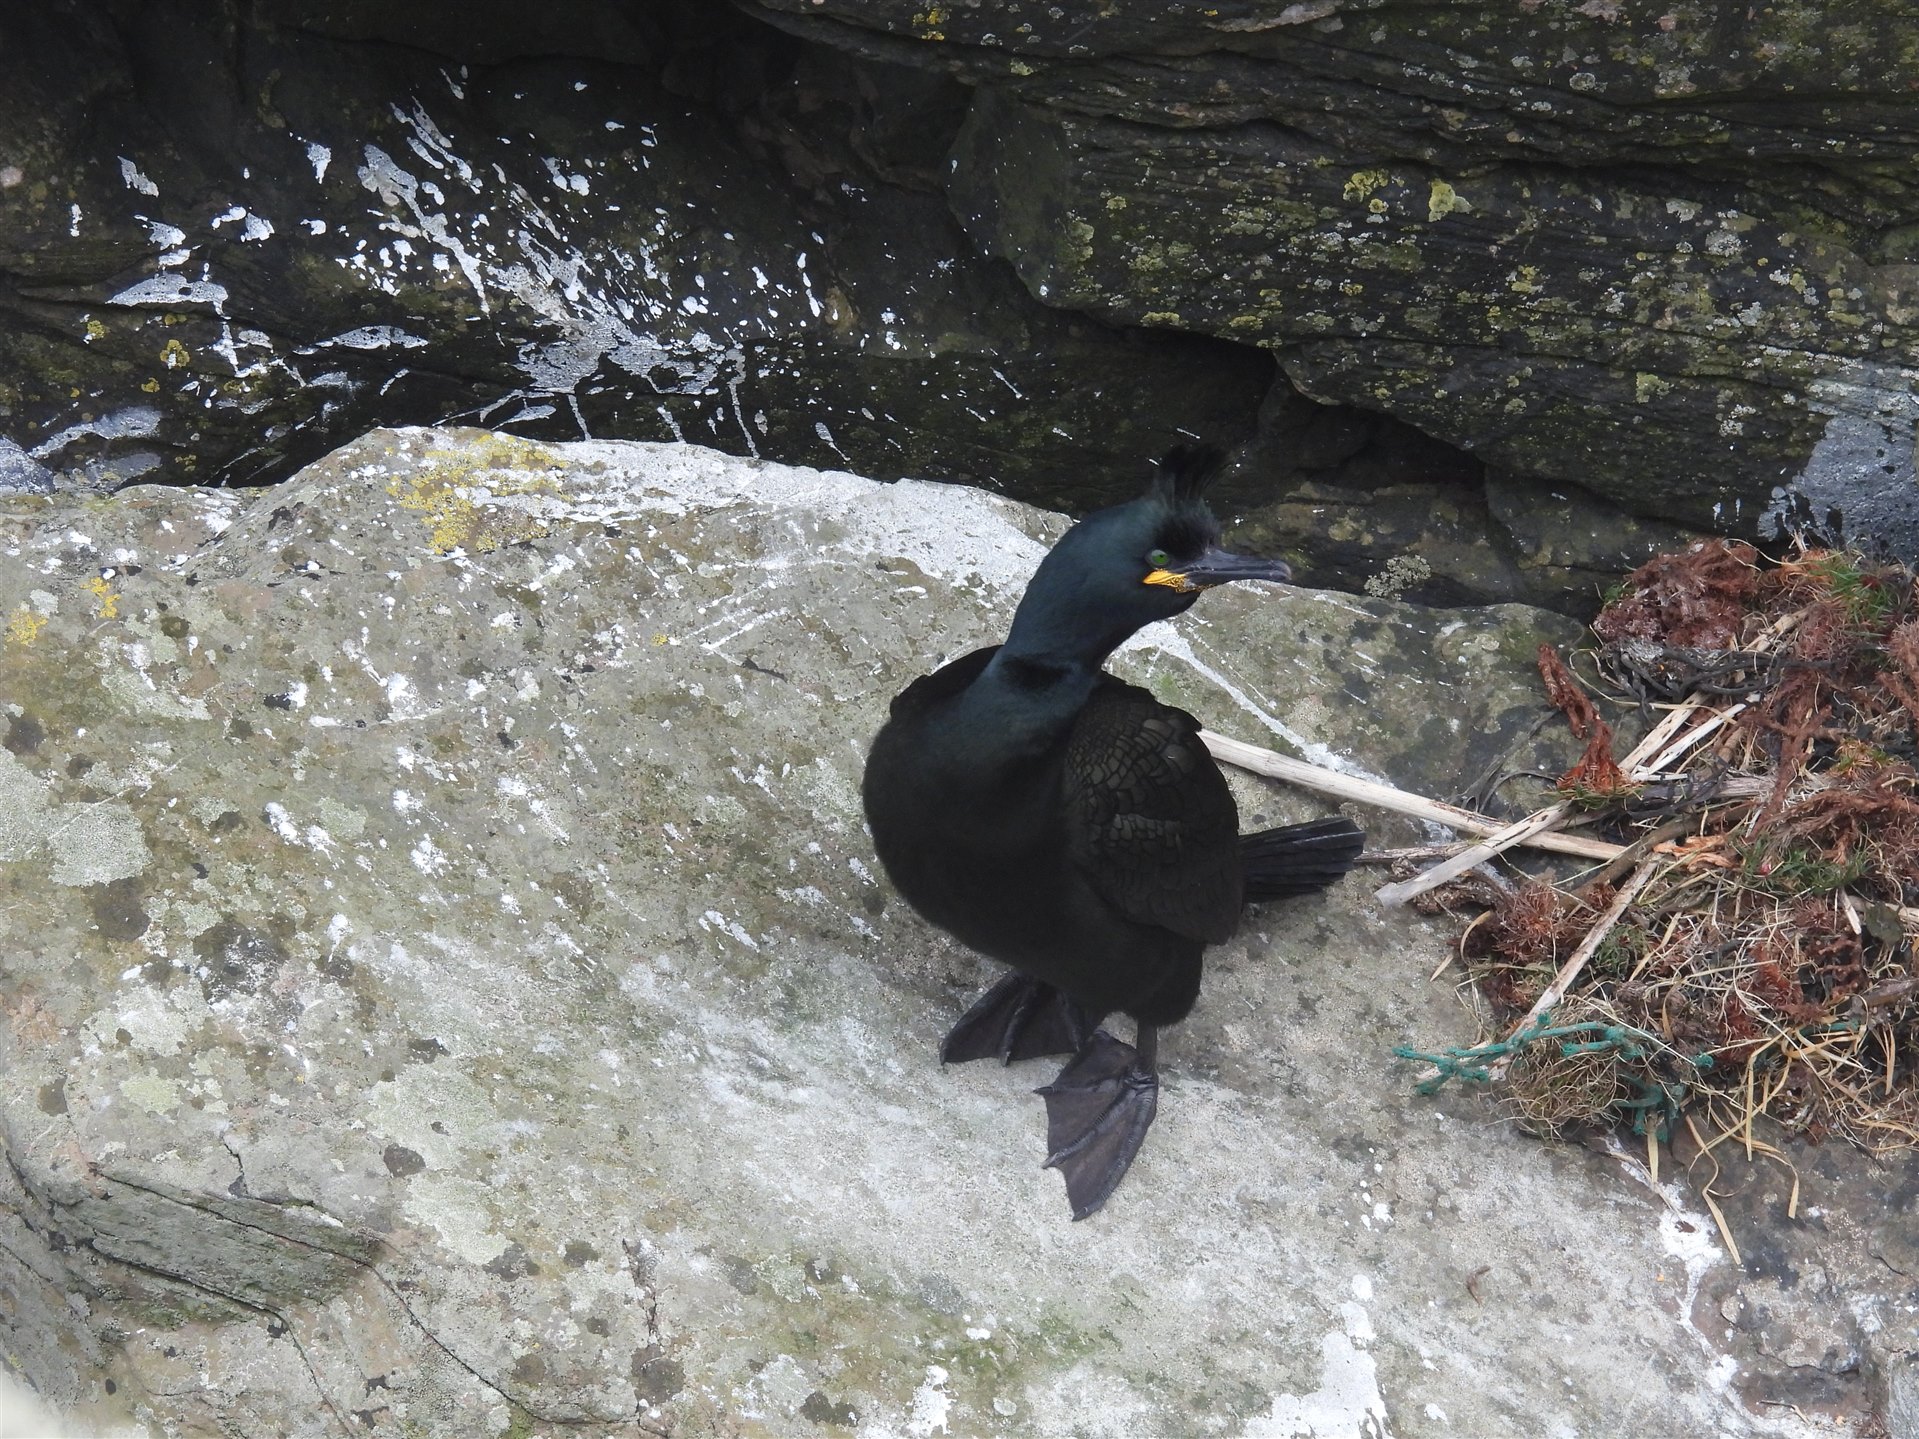 A shag looks sideways at the camera with it's green eye. A nest can be seen to the right hand side